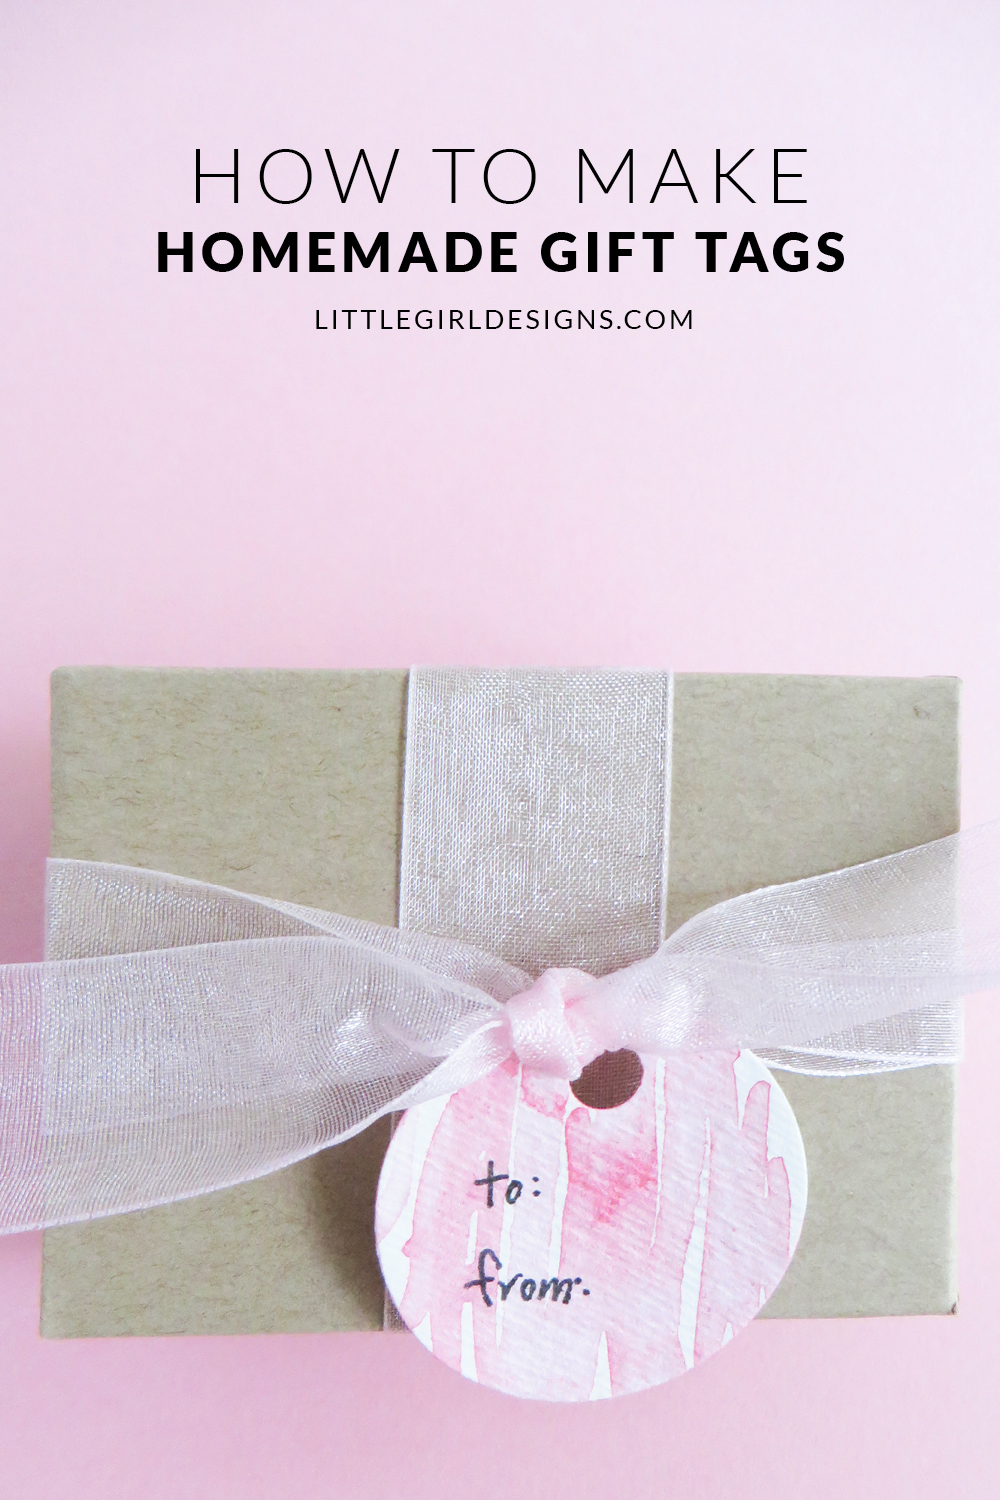 DIY Gift Tags - Why buy gift tags when you can make your own in minutes? This also makes a fun kid's craft! via littlegirldesigns.com